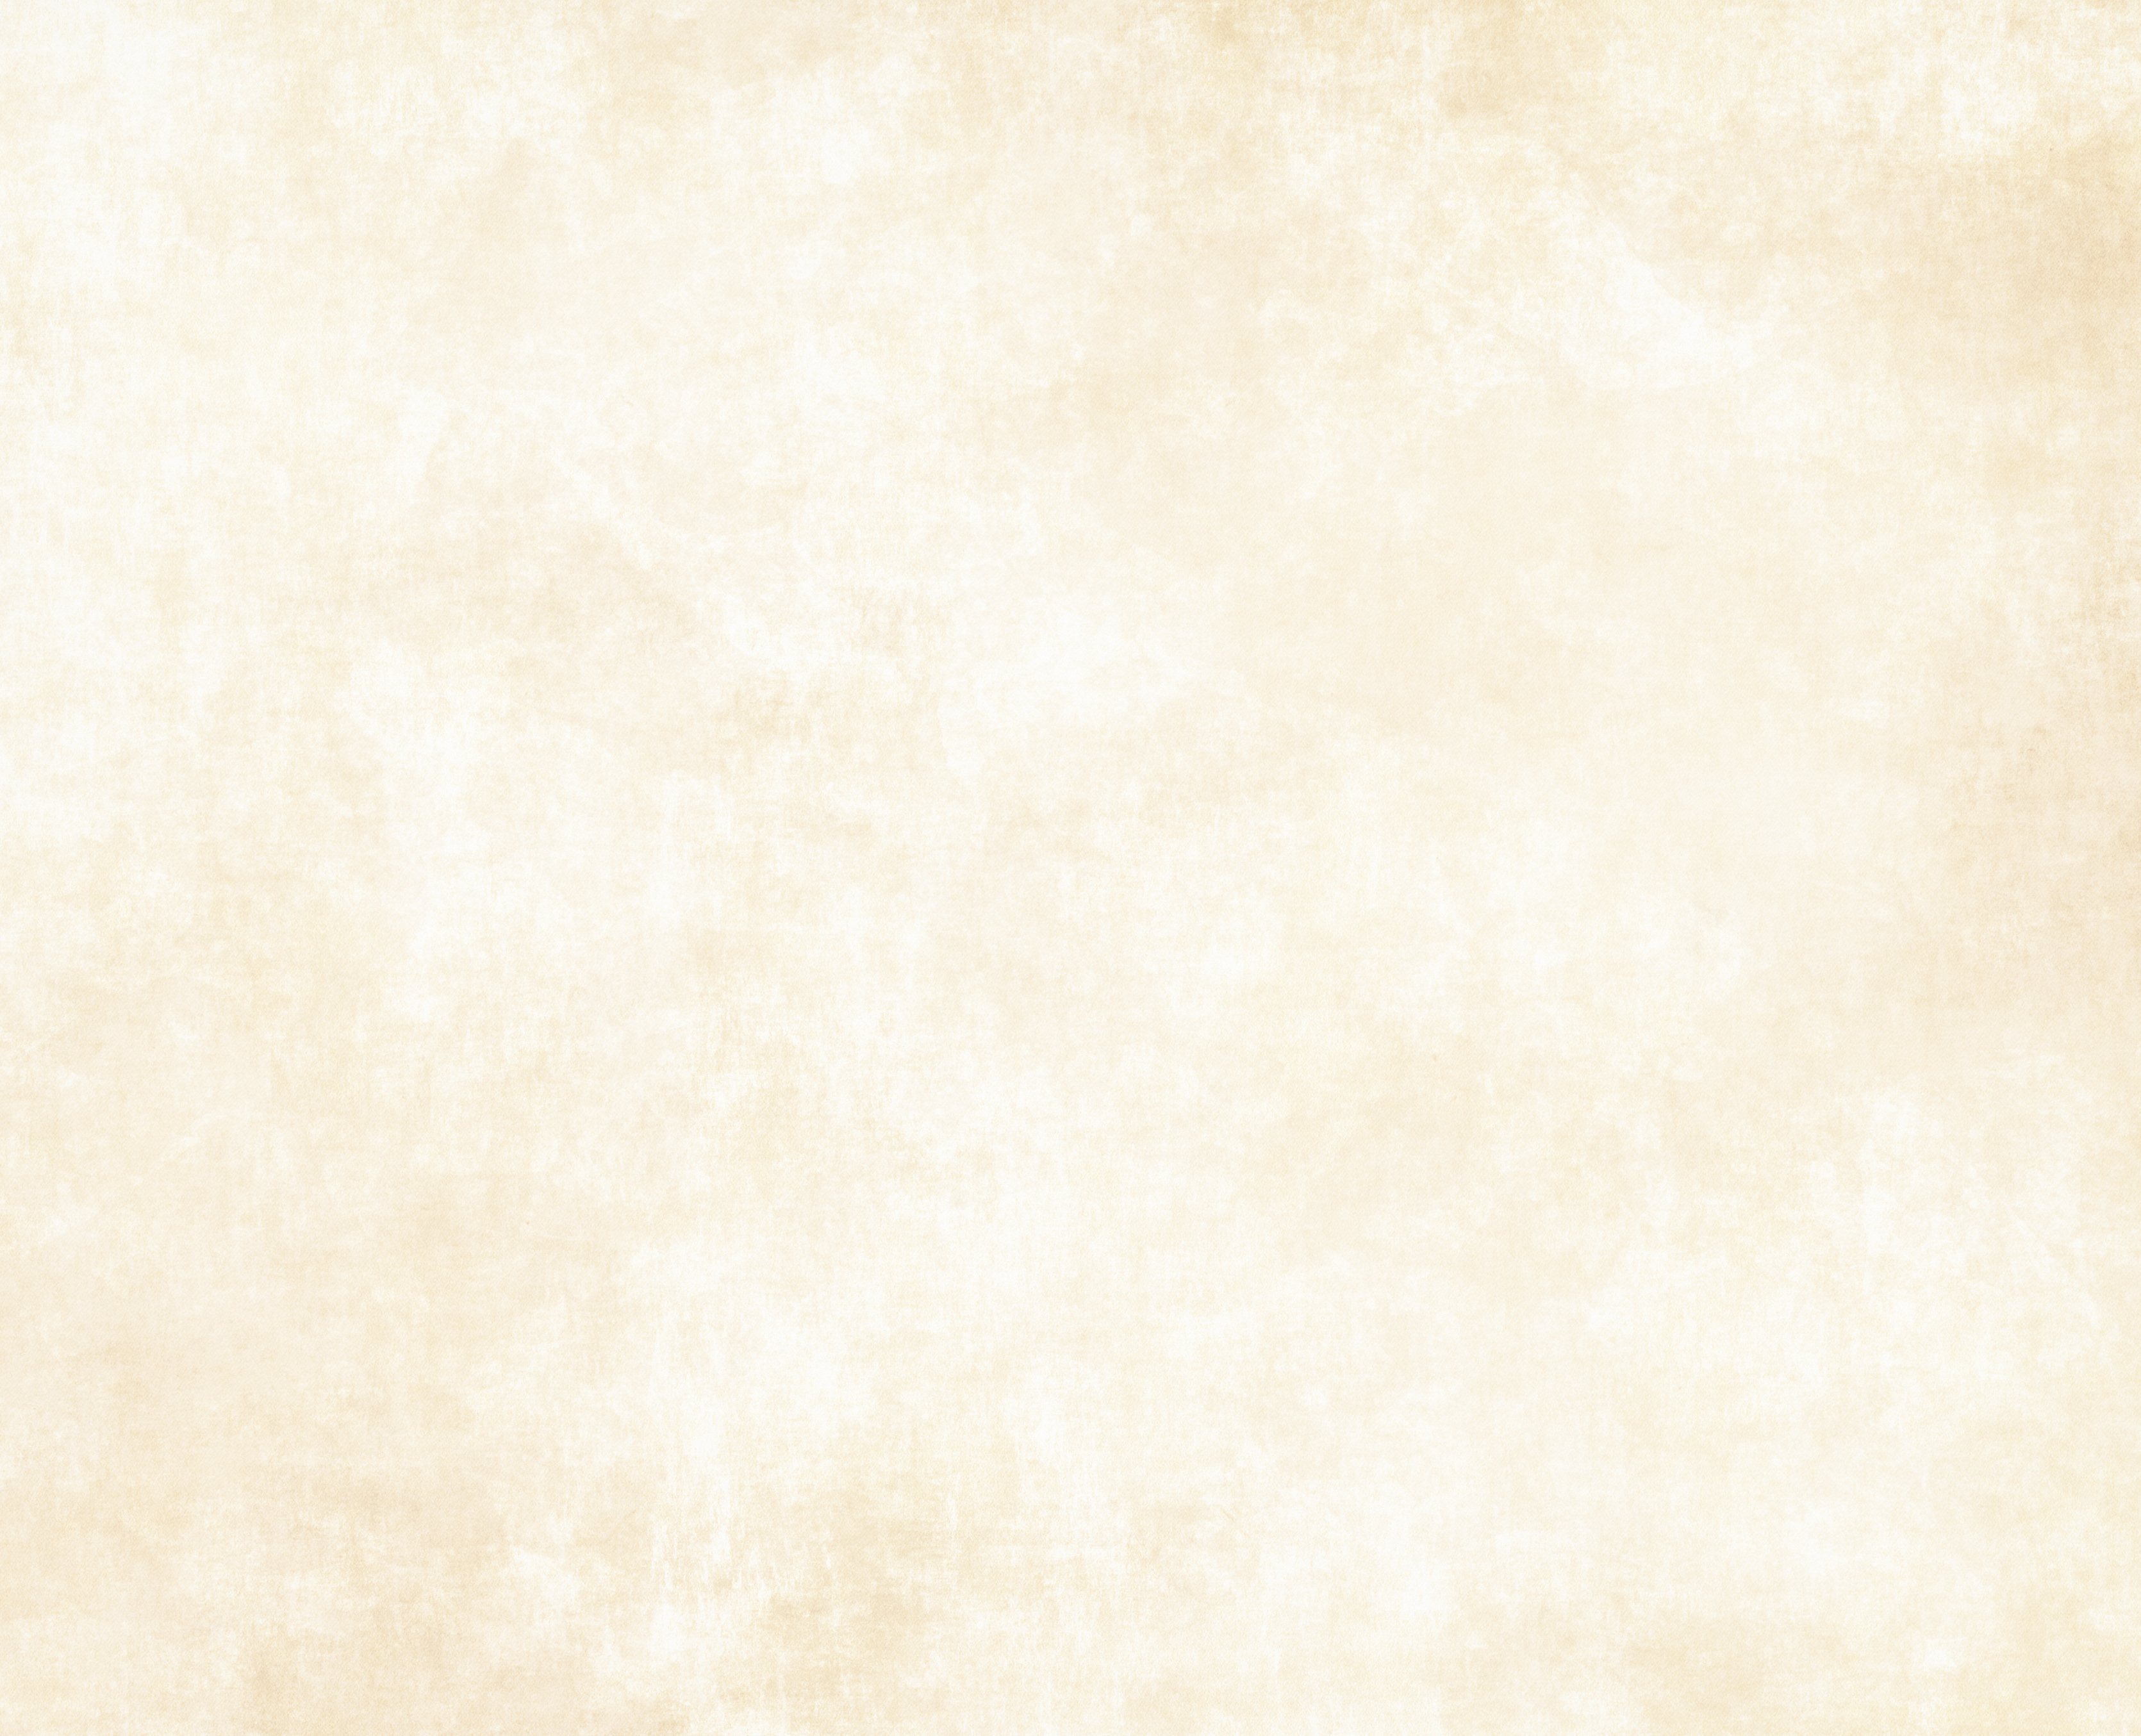 Large Old Paper Or Parchment Background Texture The Great